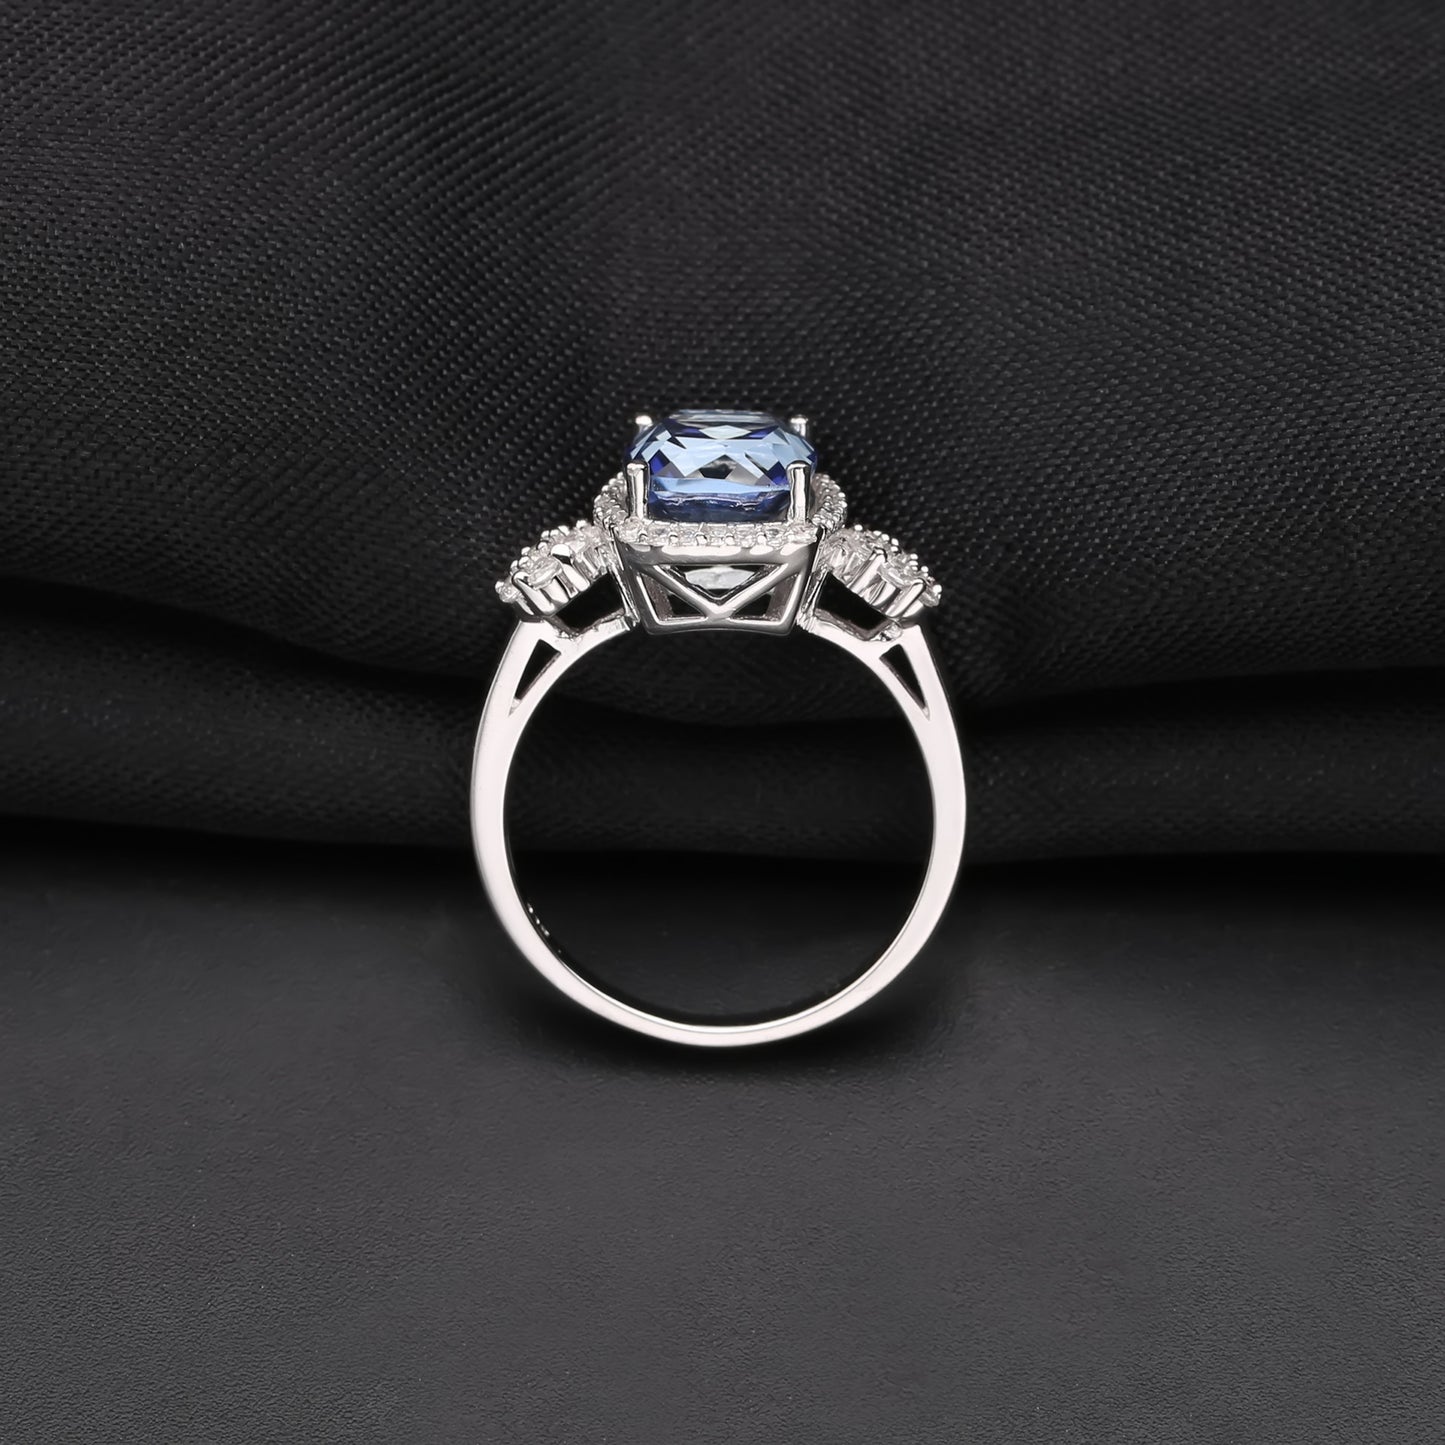 Classic Vintage Luxury S925 Silver Inlaid Laminated Crystal Ring for Women